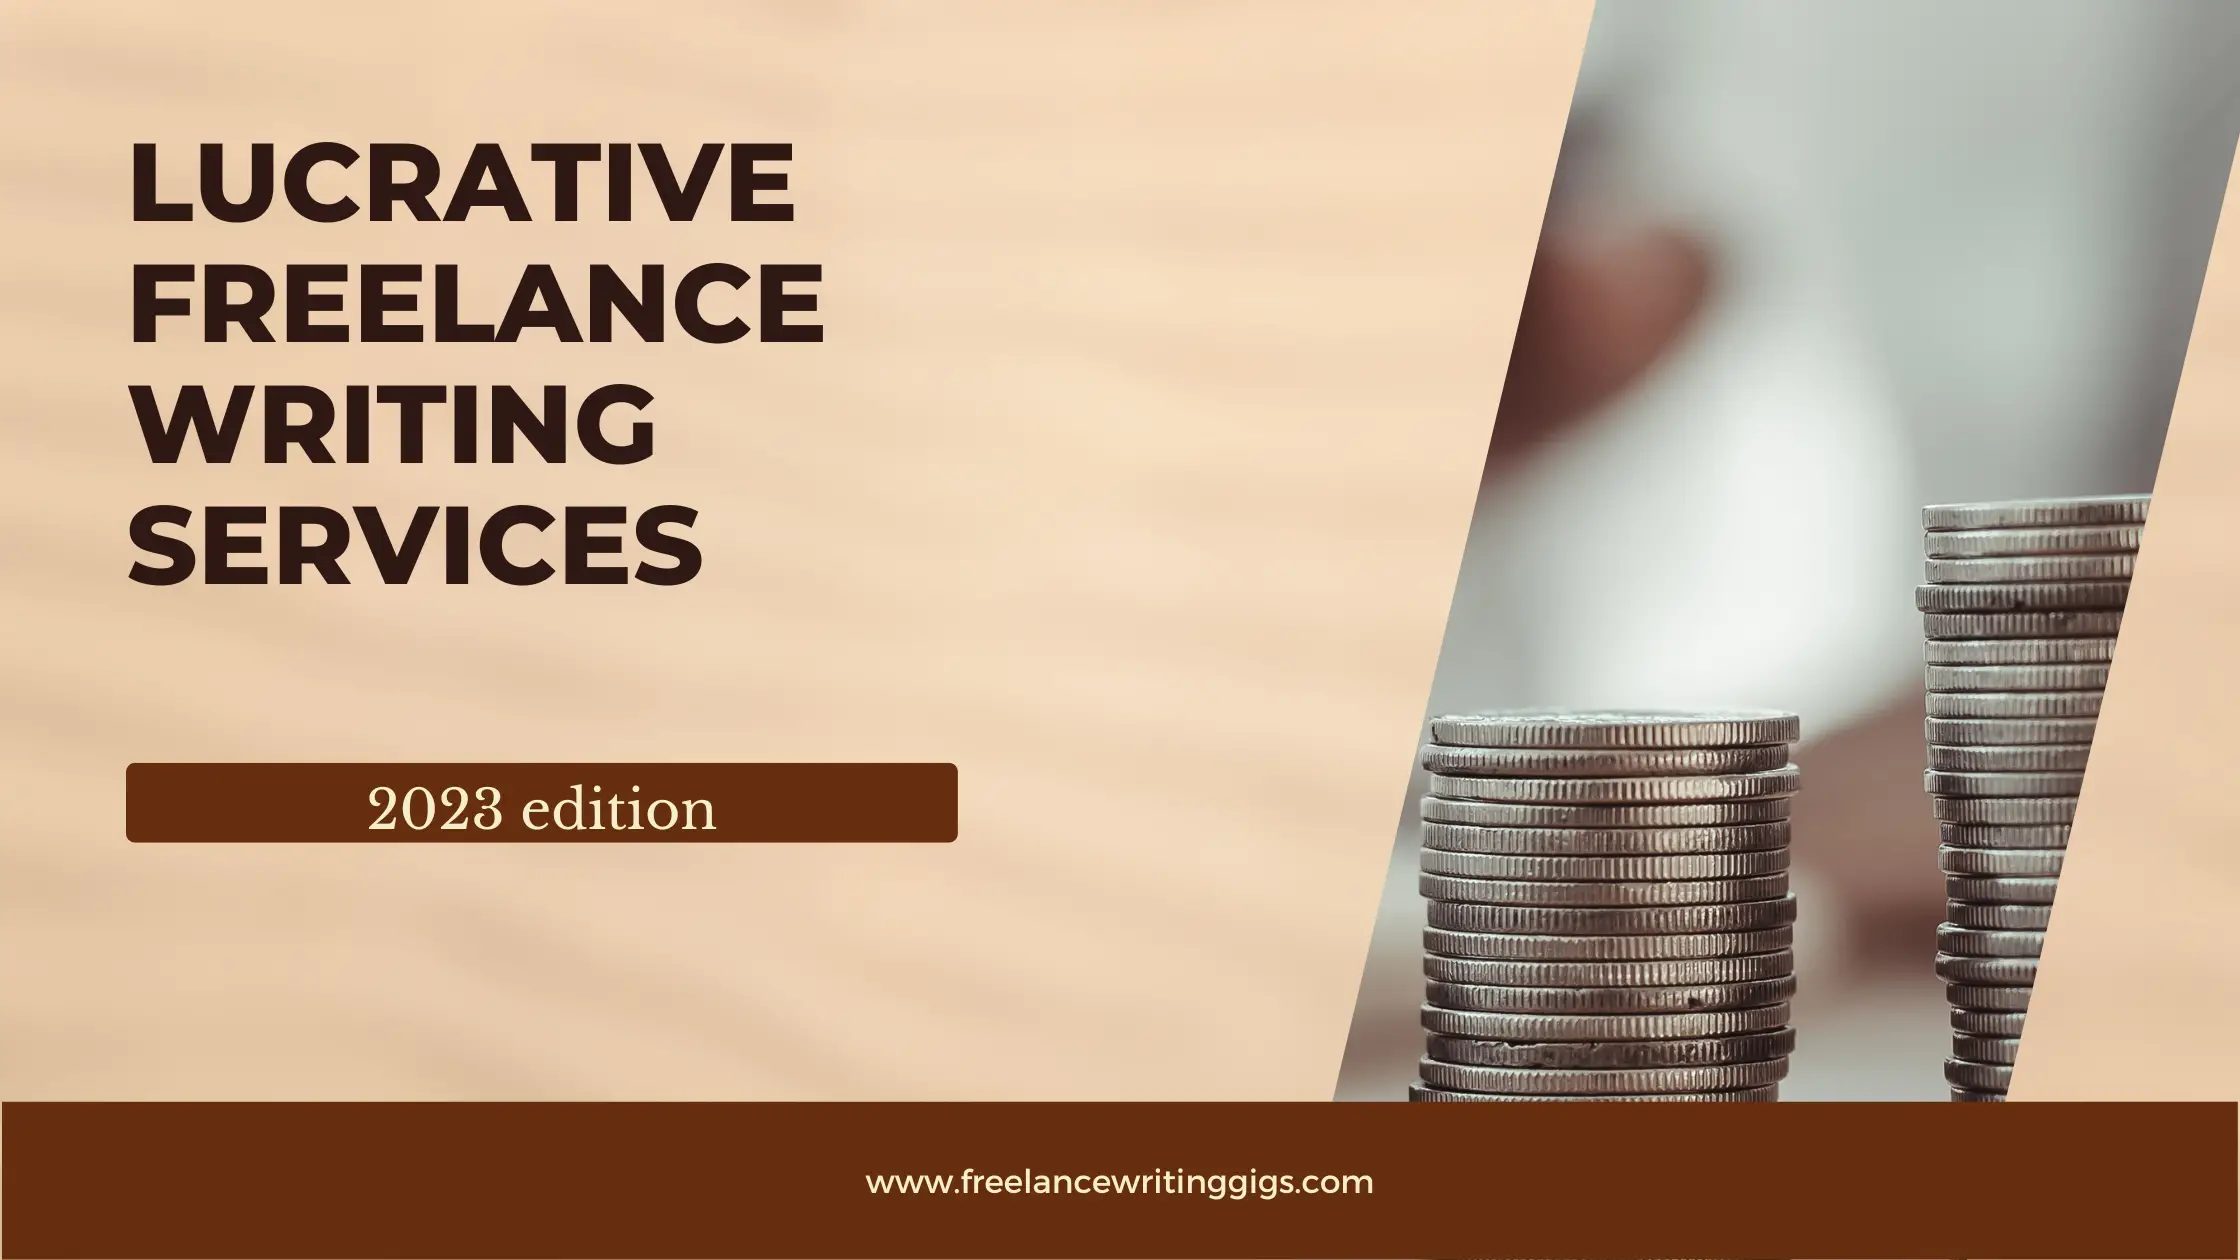 Lucrative Freelance Writing Services You Can Offer Clients in 2023